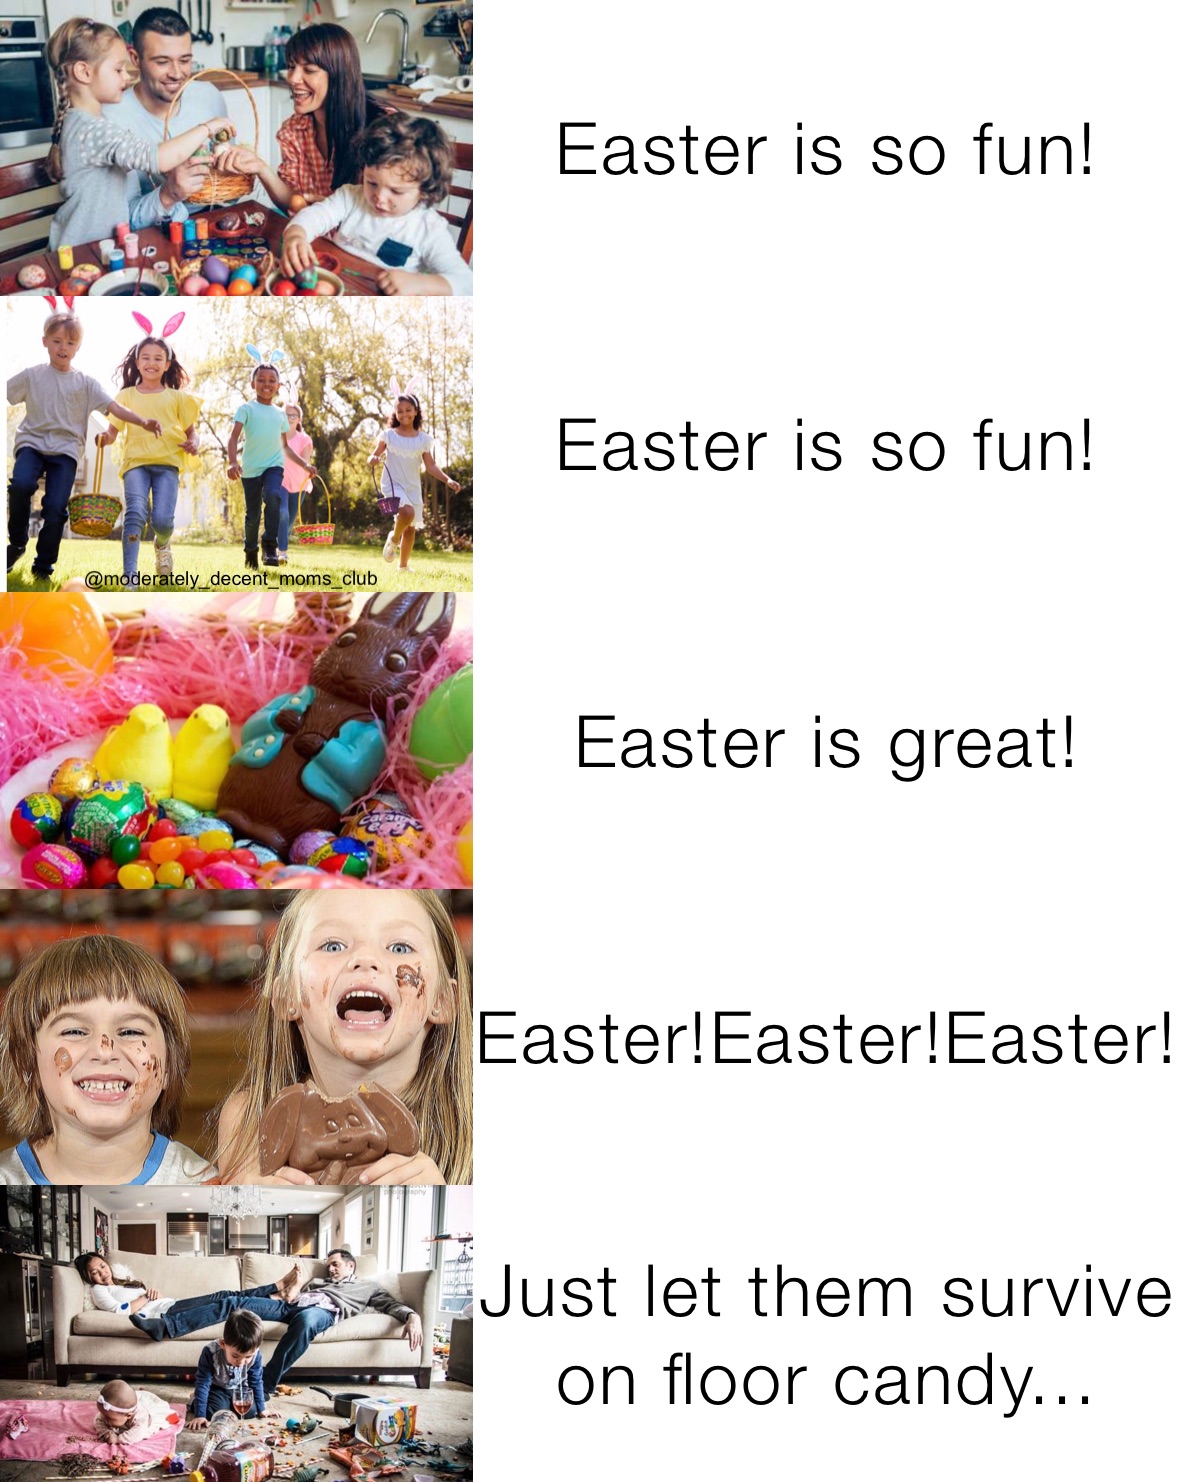 Easter is so fun! Easter is so fun! Easter is great! Easter!Easter!Easter! Just let them survive on floor candy...